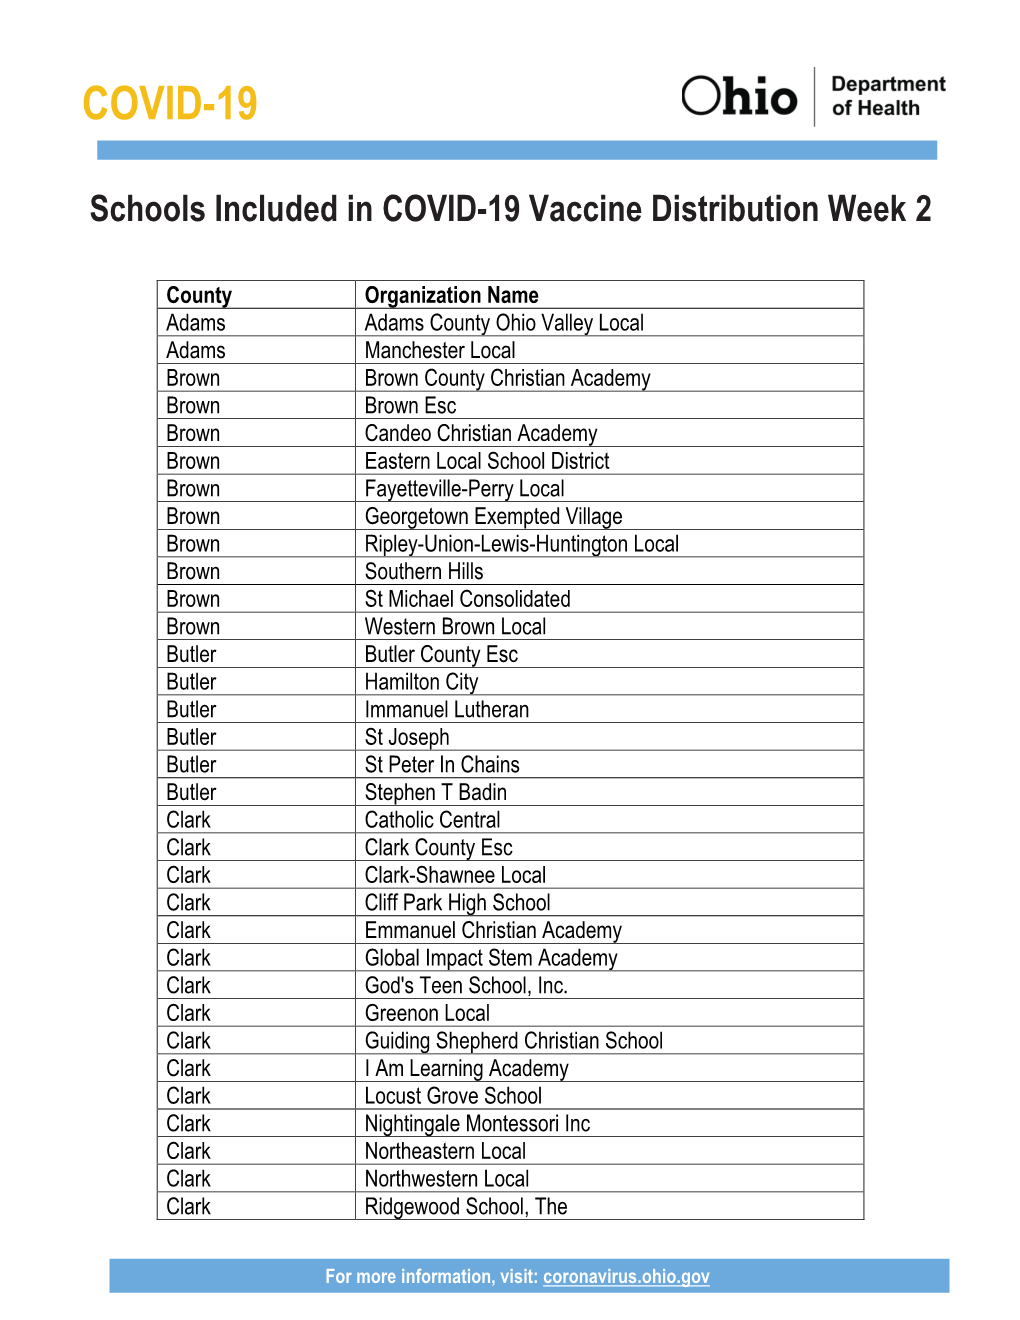 Schools Included in COVID-19 Vaccine Distribution Week 2